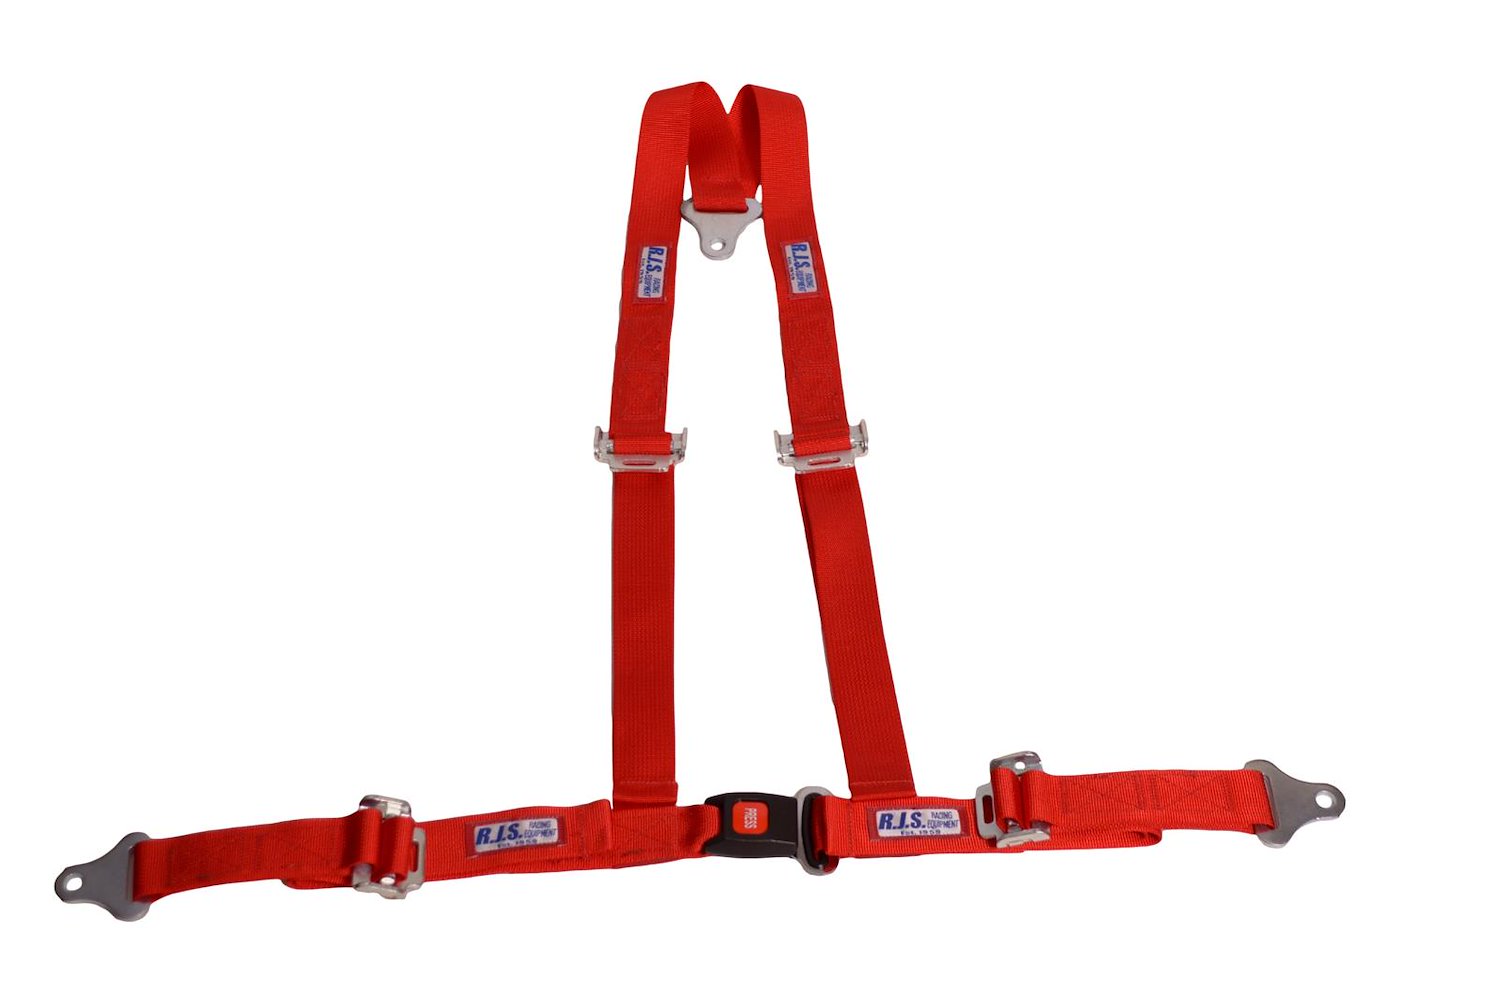 NON-SFI L&L HARNESS 3 PULL DOWN Lap Belt BOLT SEWN IN 2 S.H. Y FLOOR Mount WRAP/BOLT RED